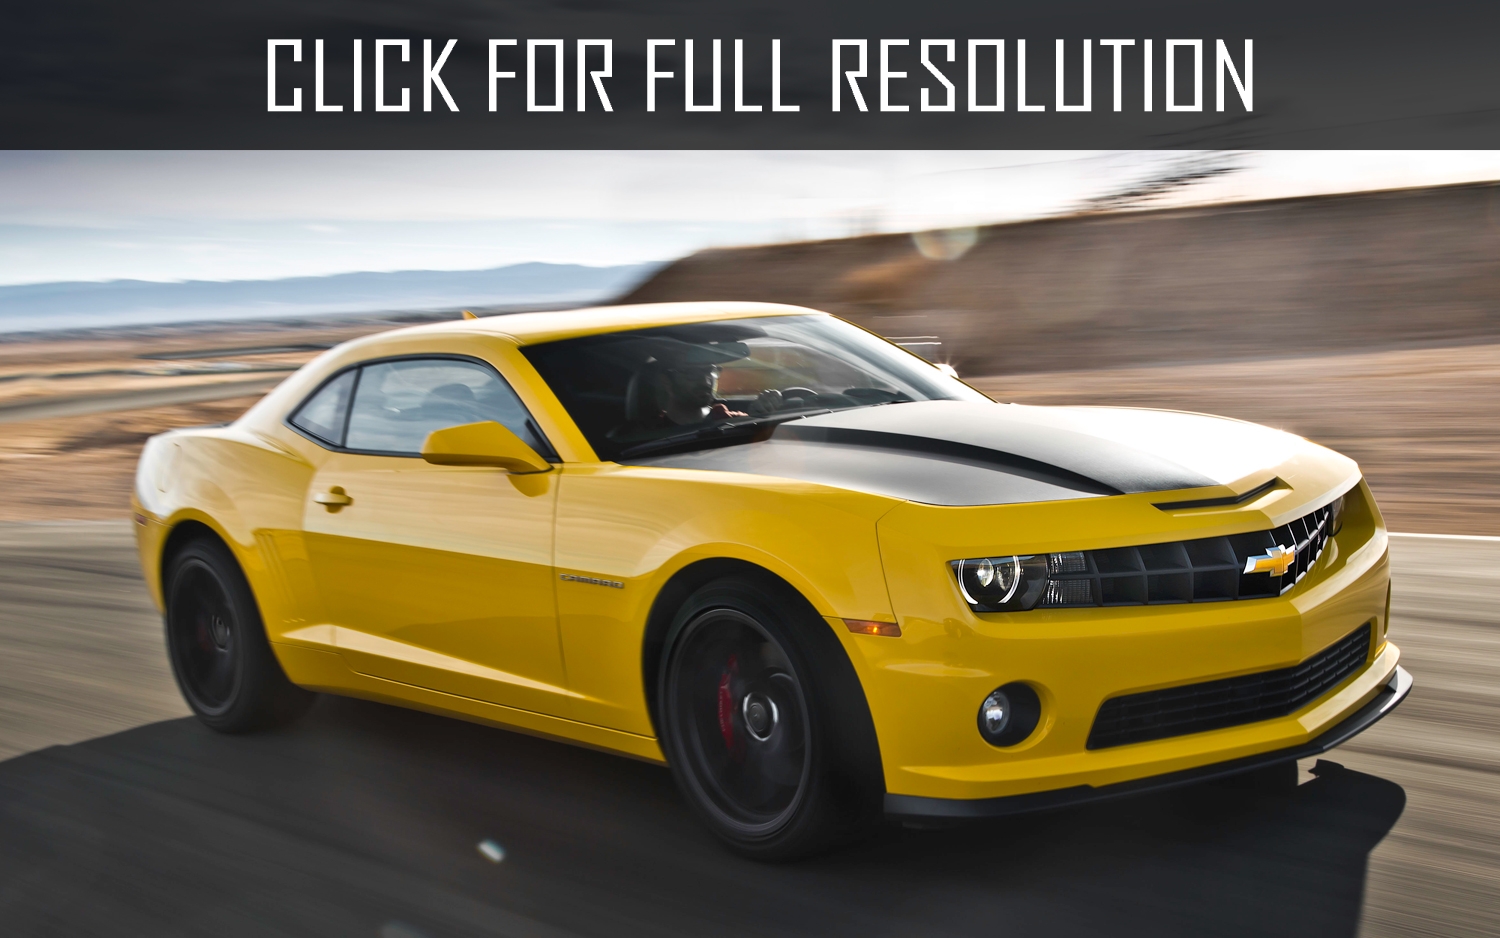 Chevrolet Camaro Gt reviews, prices, ratings with